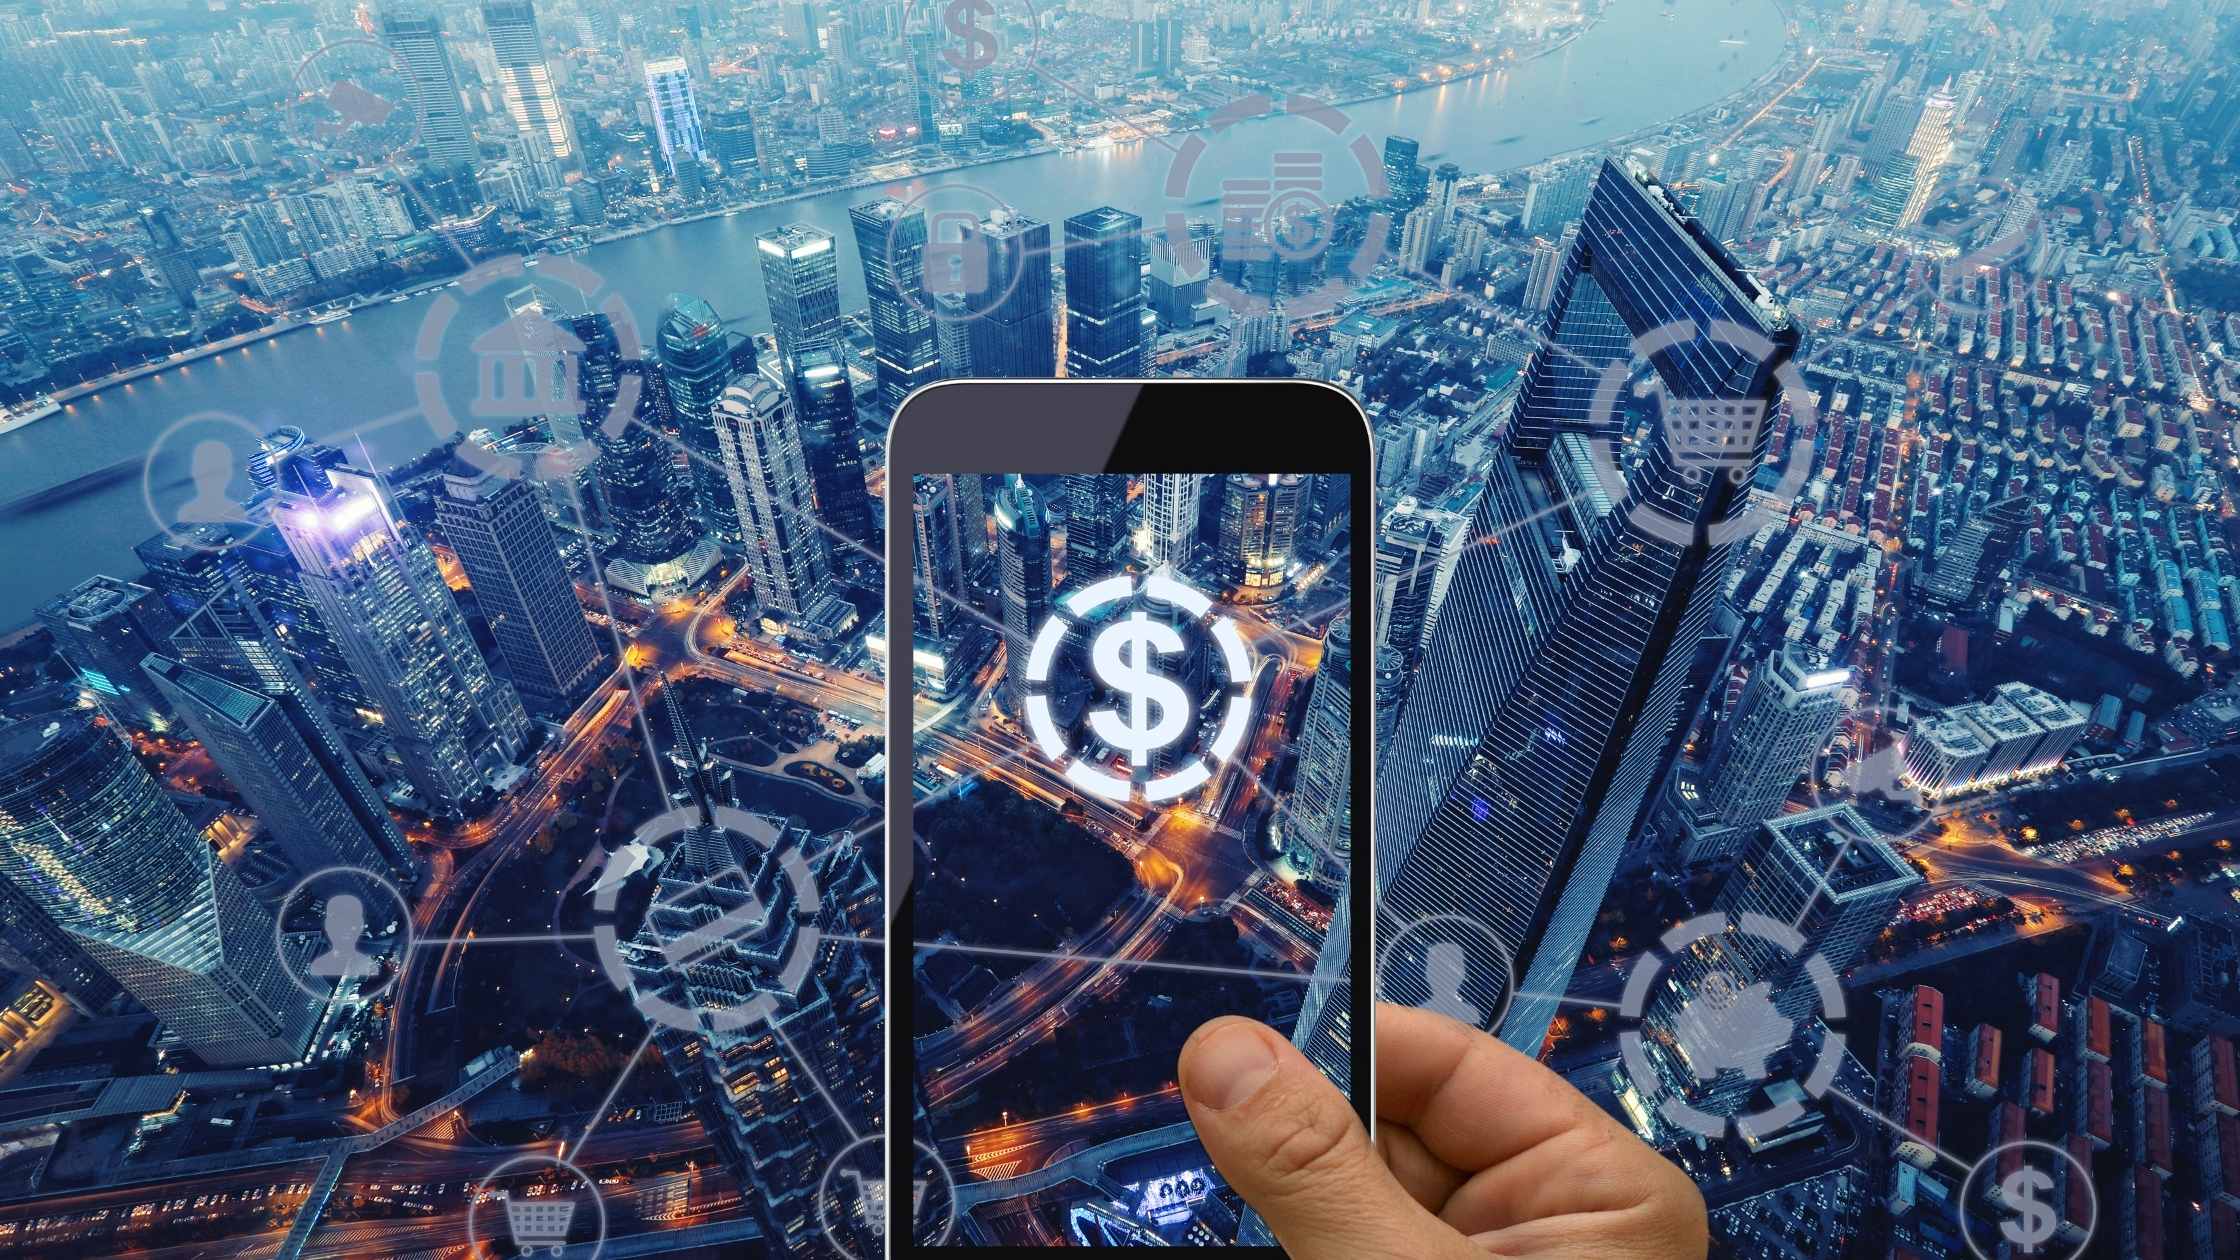 Financial Services and mobile banking concept; city in background, hand holding mobile phone with dollar symbol